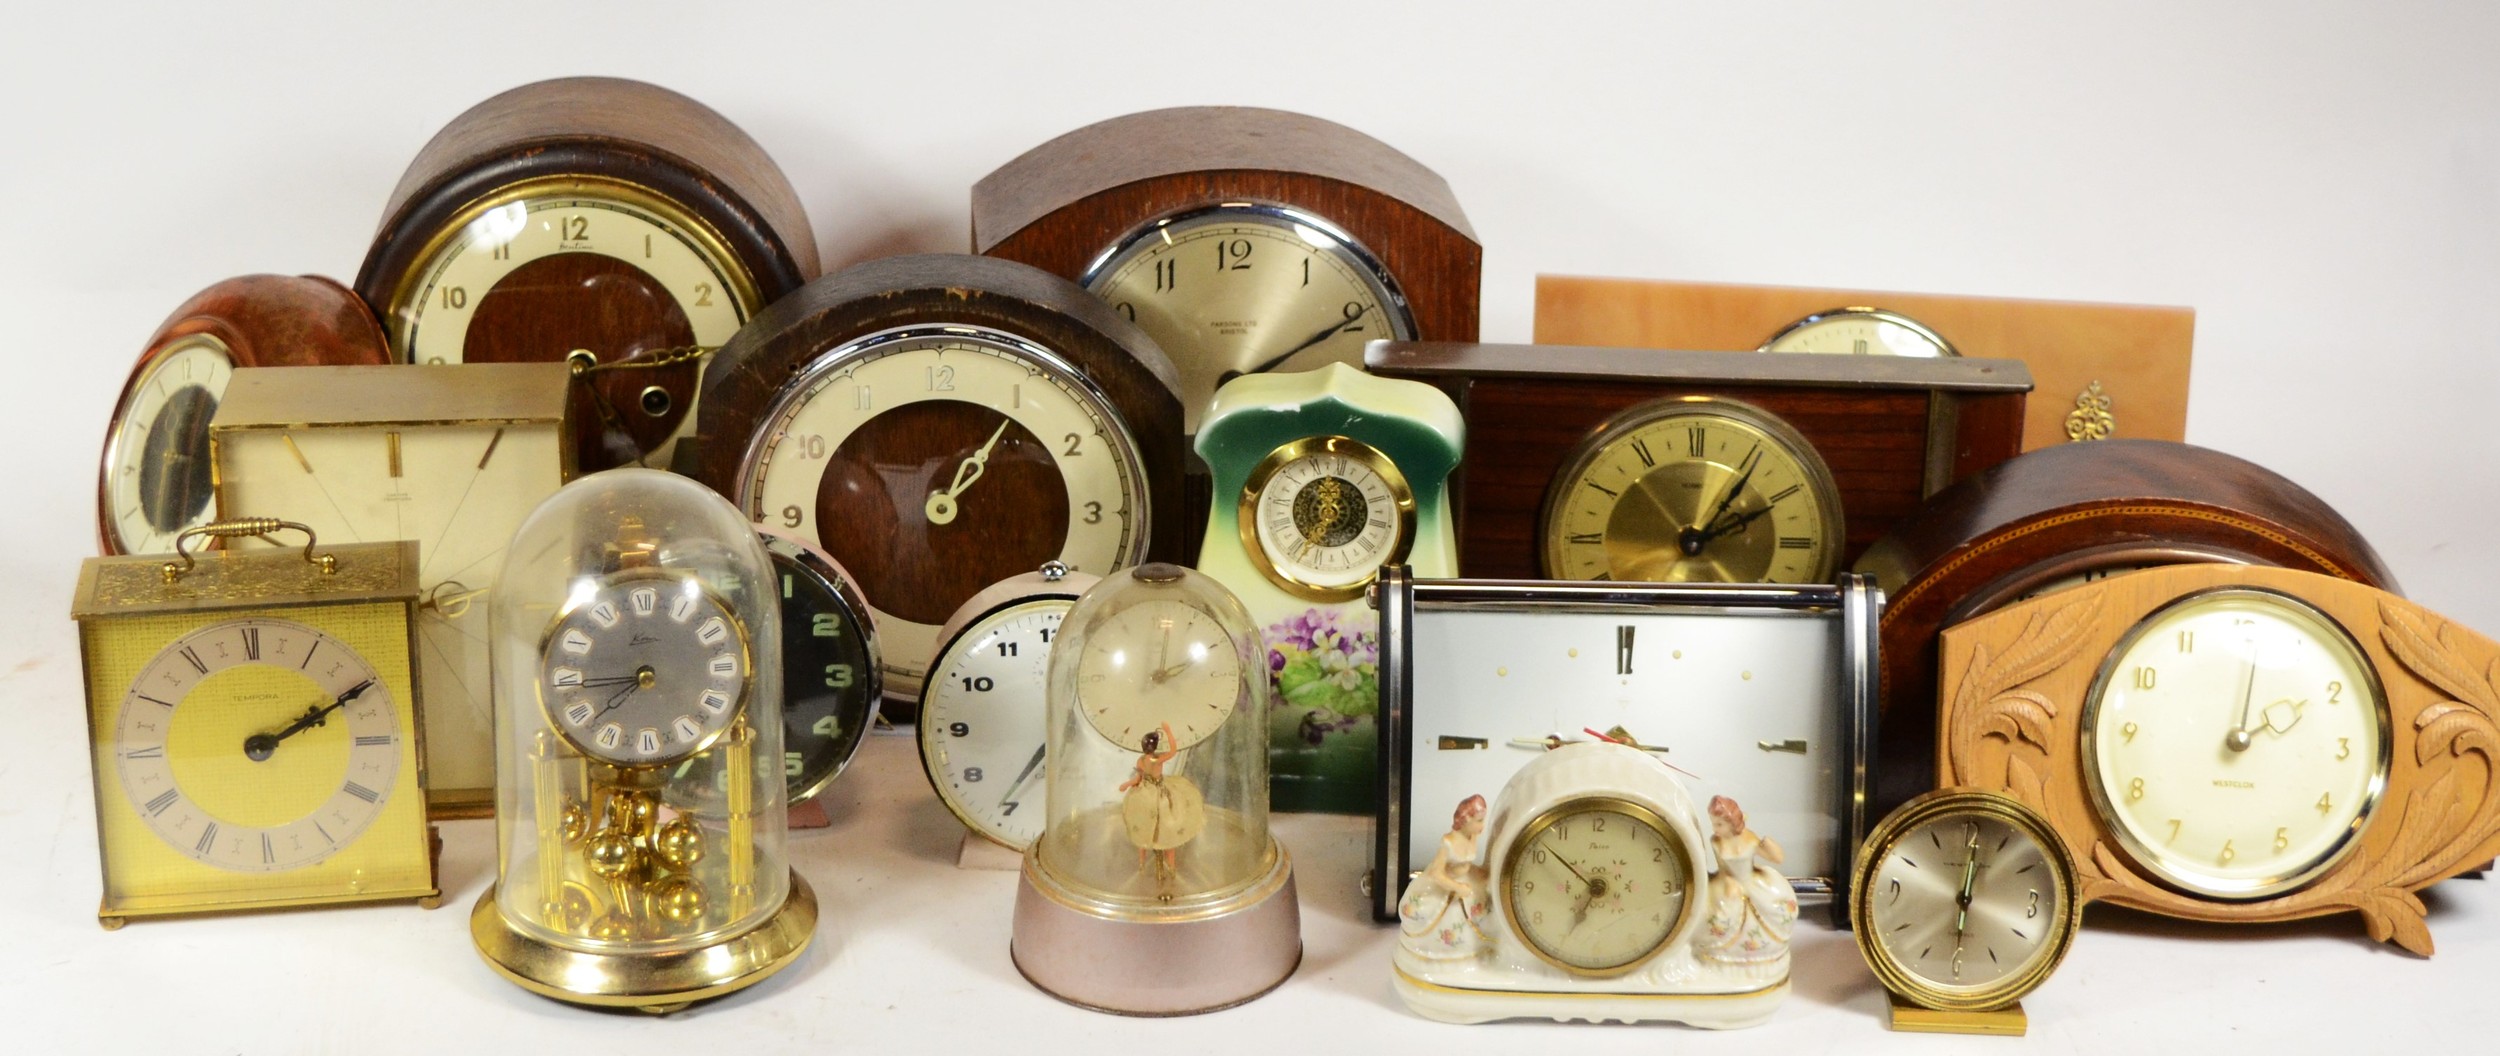 A collection of mid 20th century and later mantel clocks, having manual and quartz movements, in